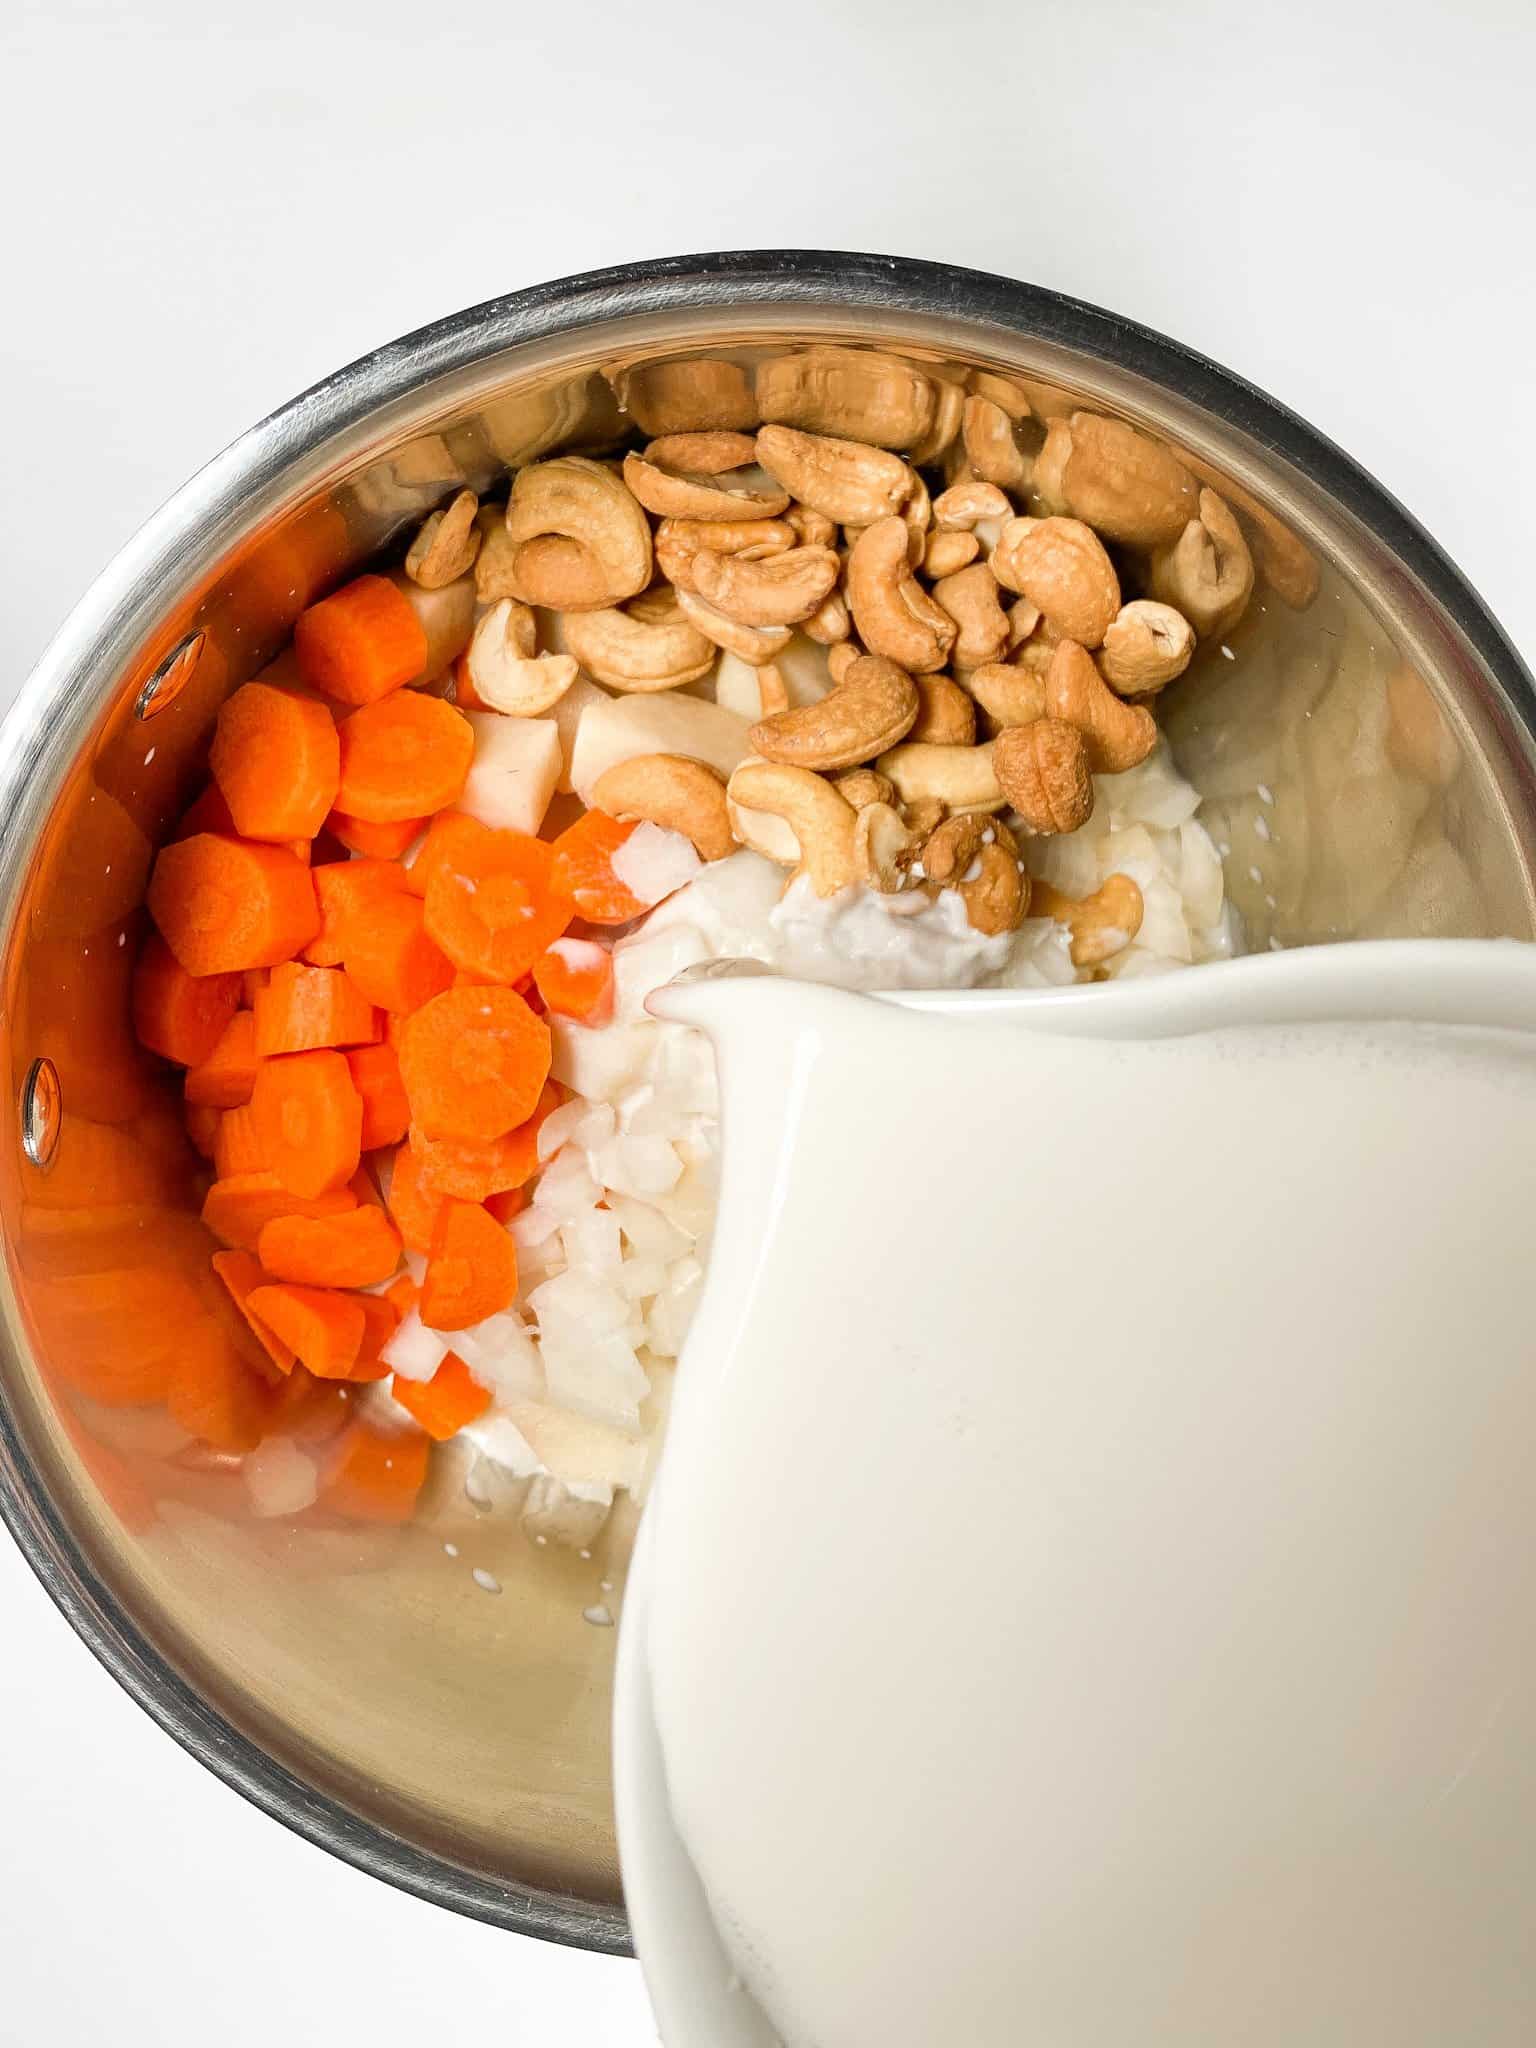 Cheese sauce ingredients in a stainless steel pot.